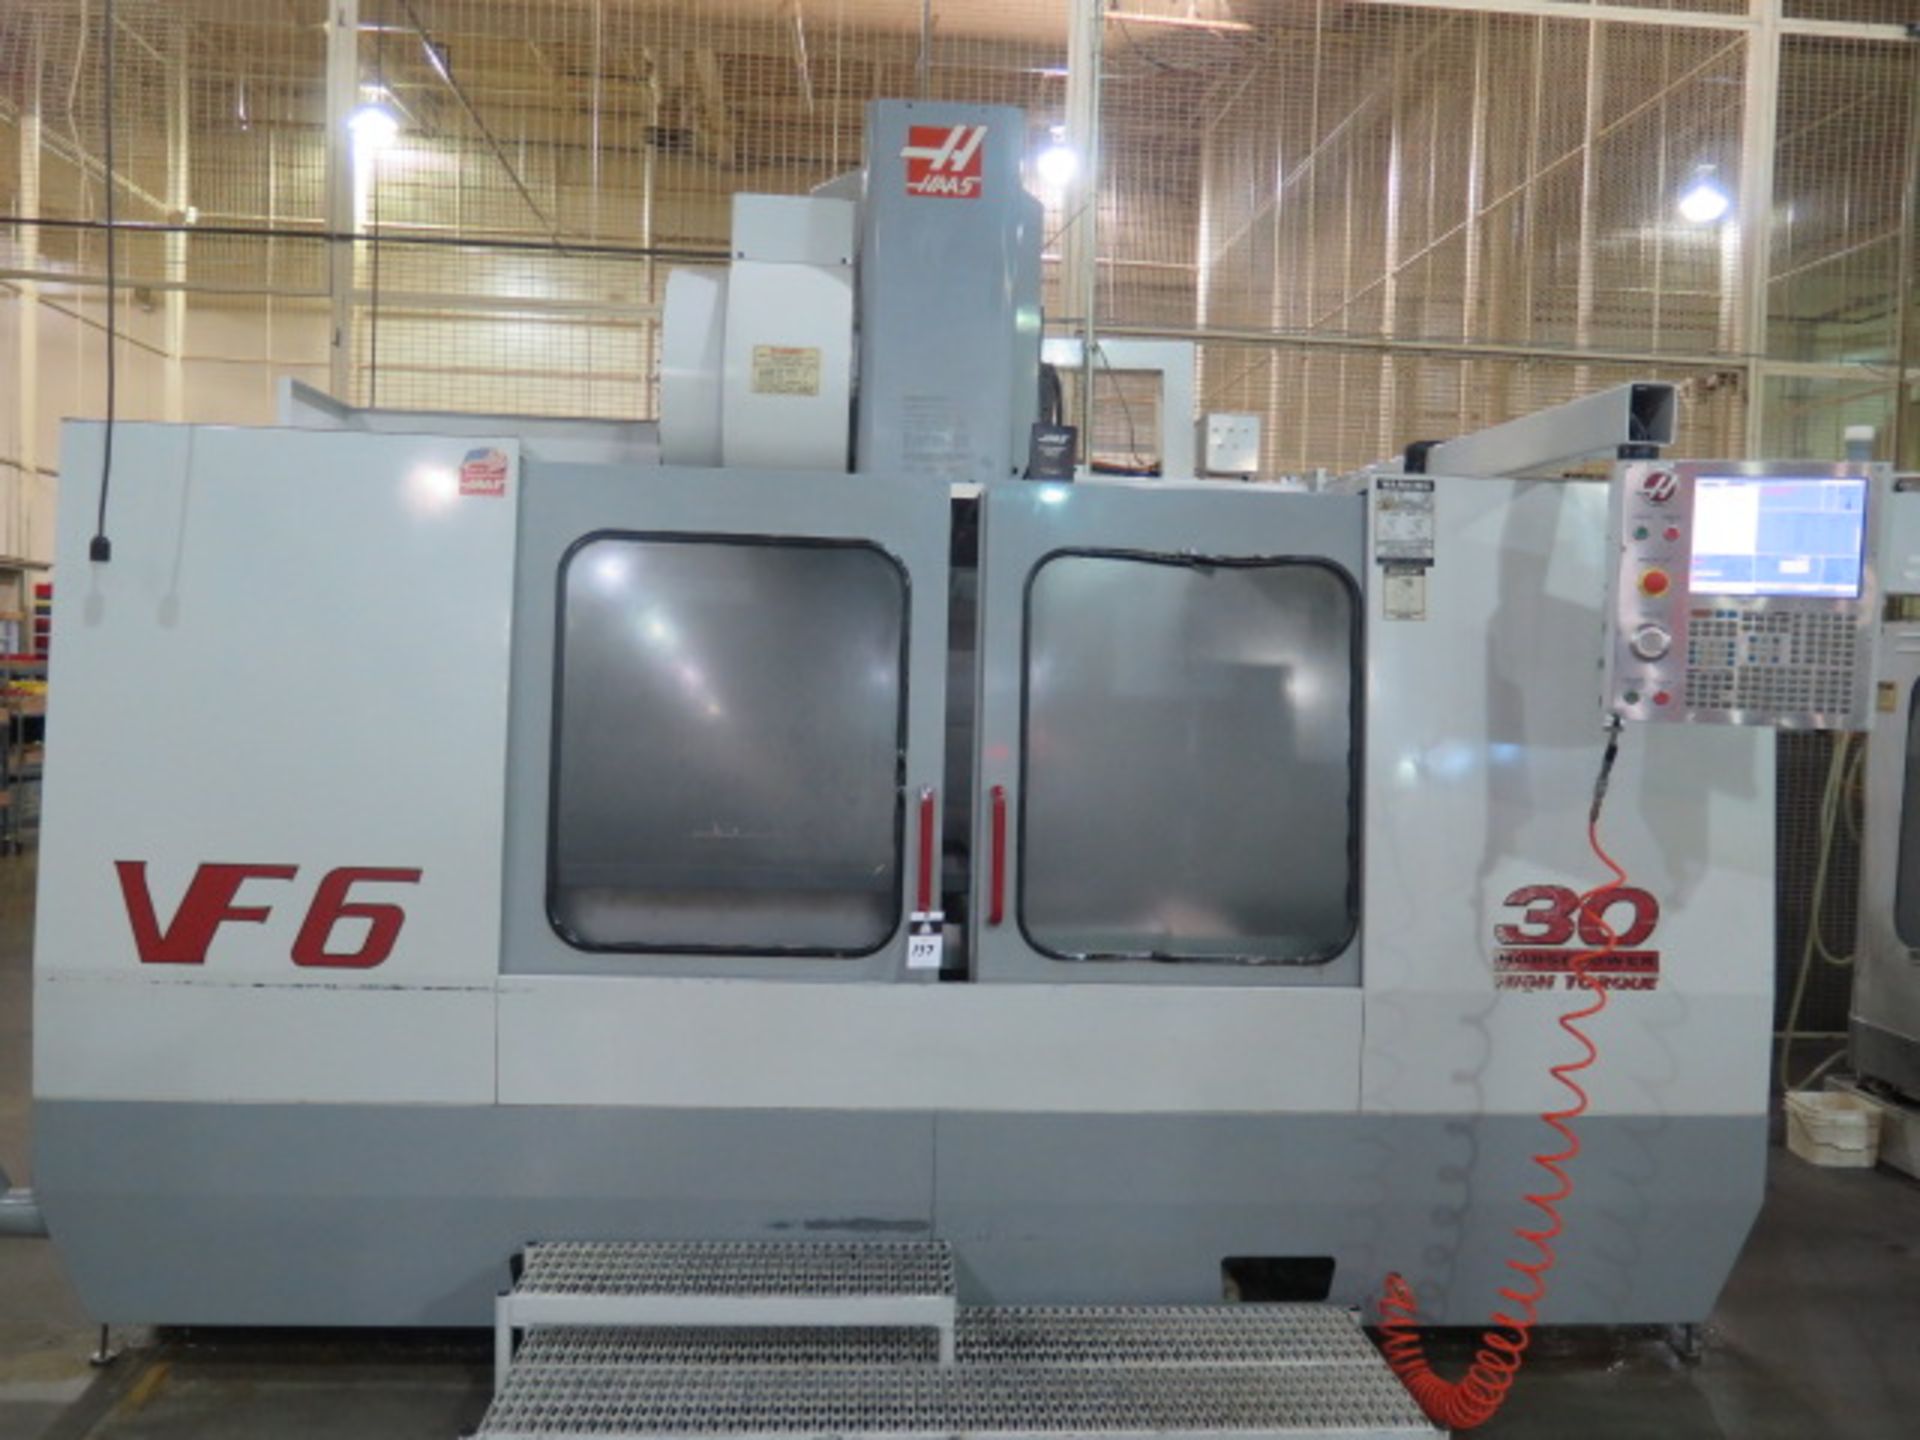 1999 Haas VF-6 CNC VMC s/n 18430 w/ Haas Controls, 24-Station Side Mount, Cat 40, SOLD AS IS